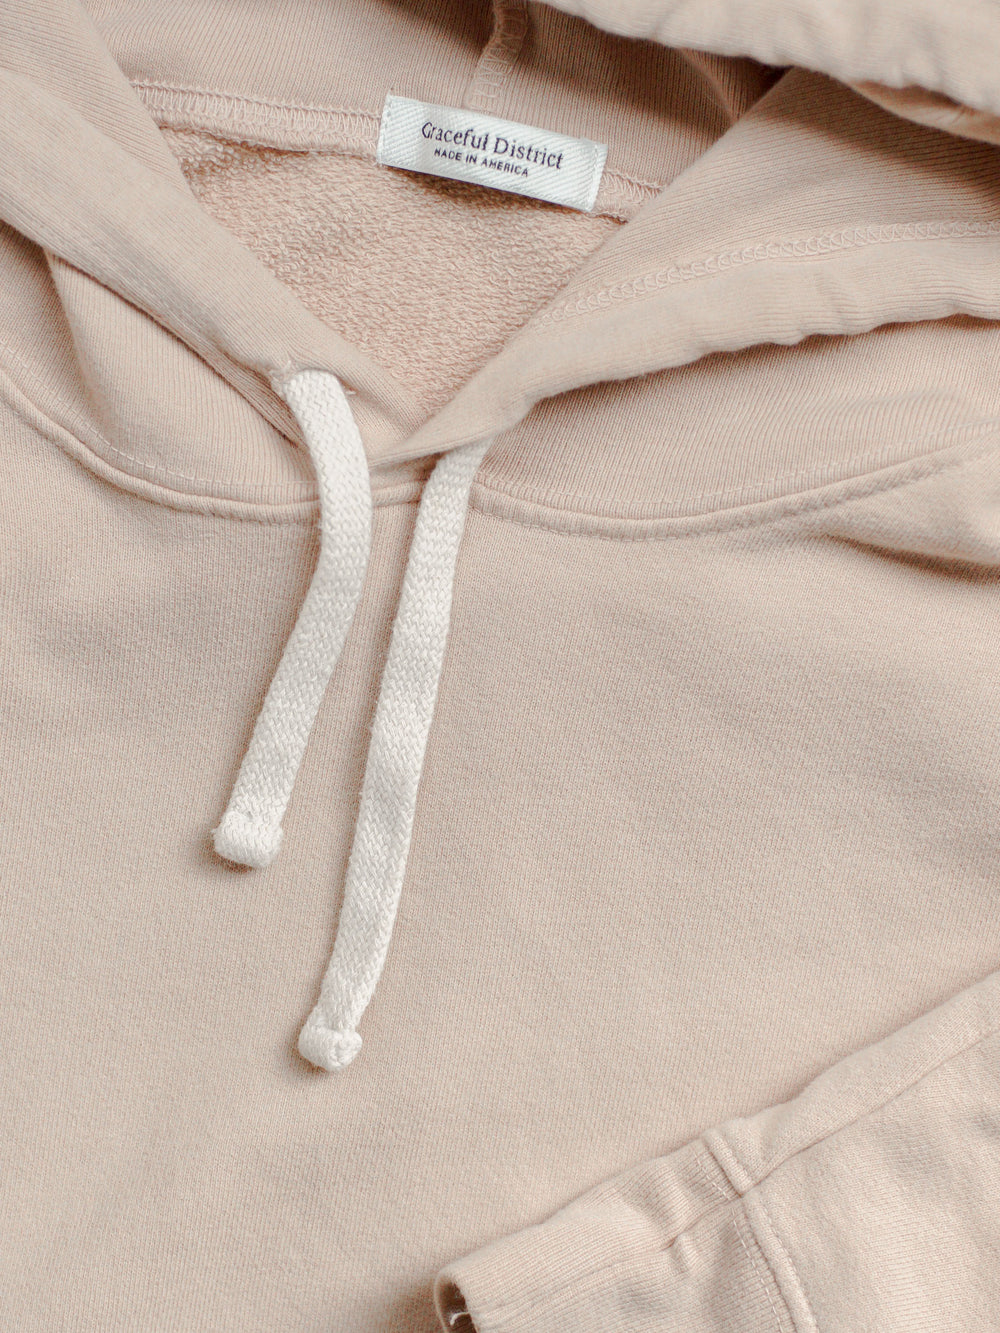 Almond Chateau Hoodie - Graceful District